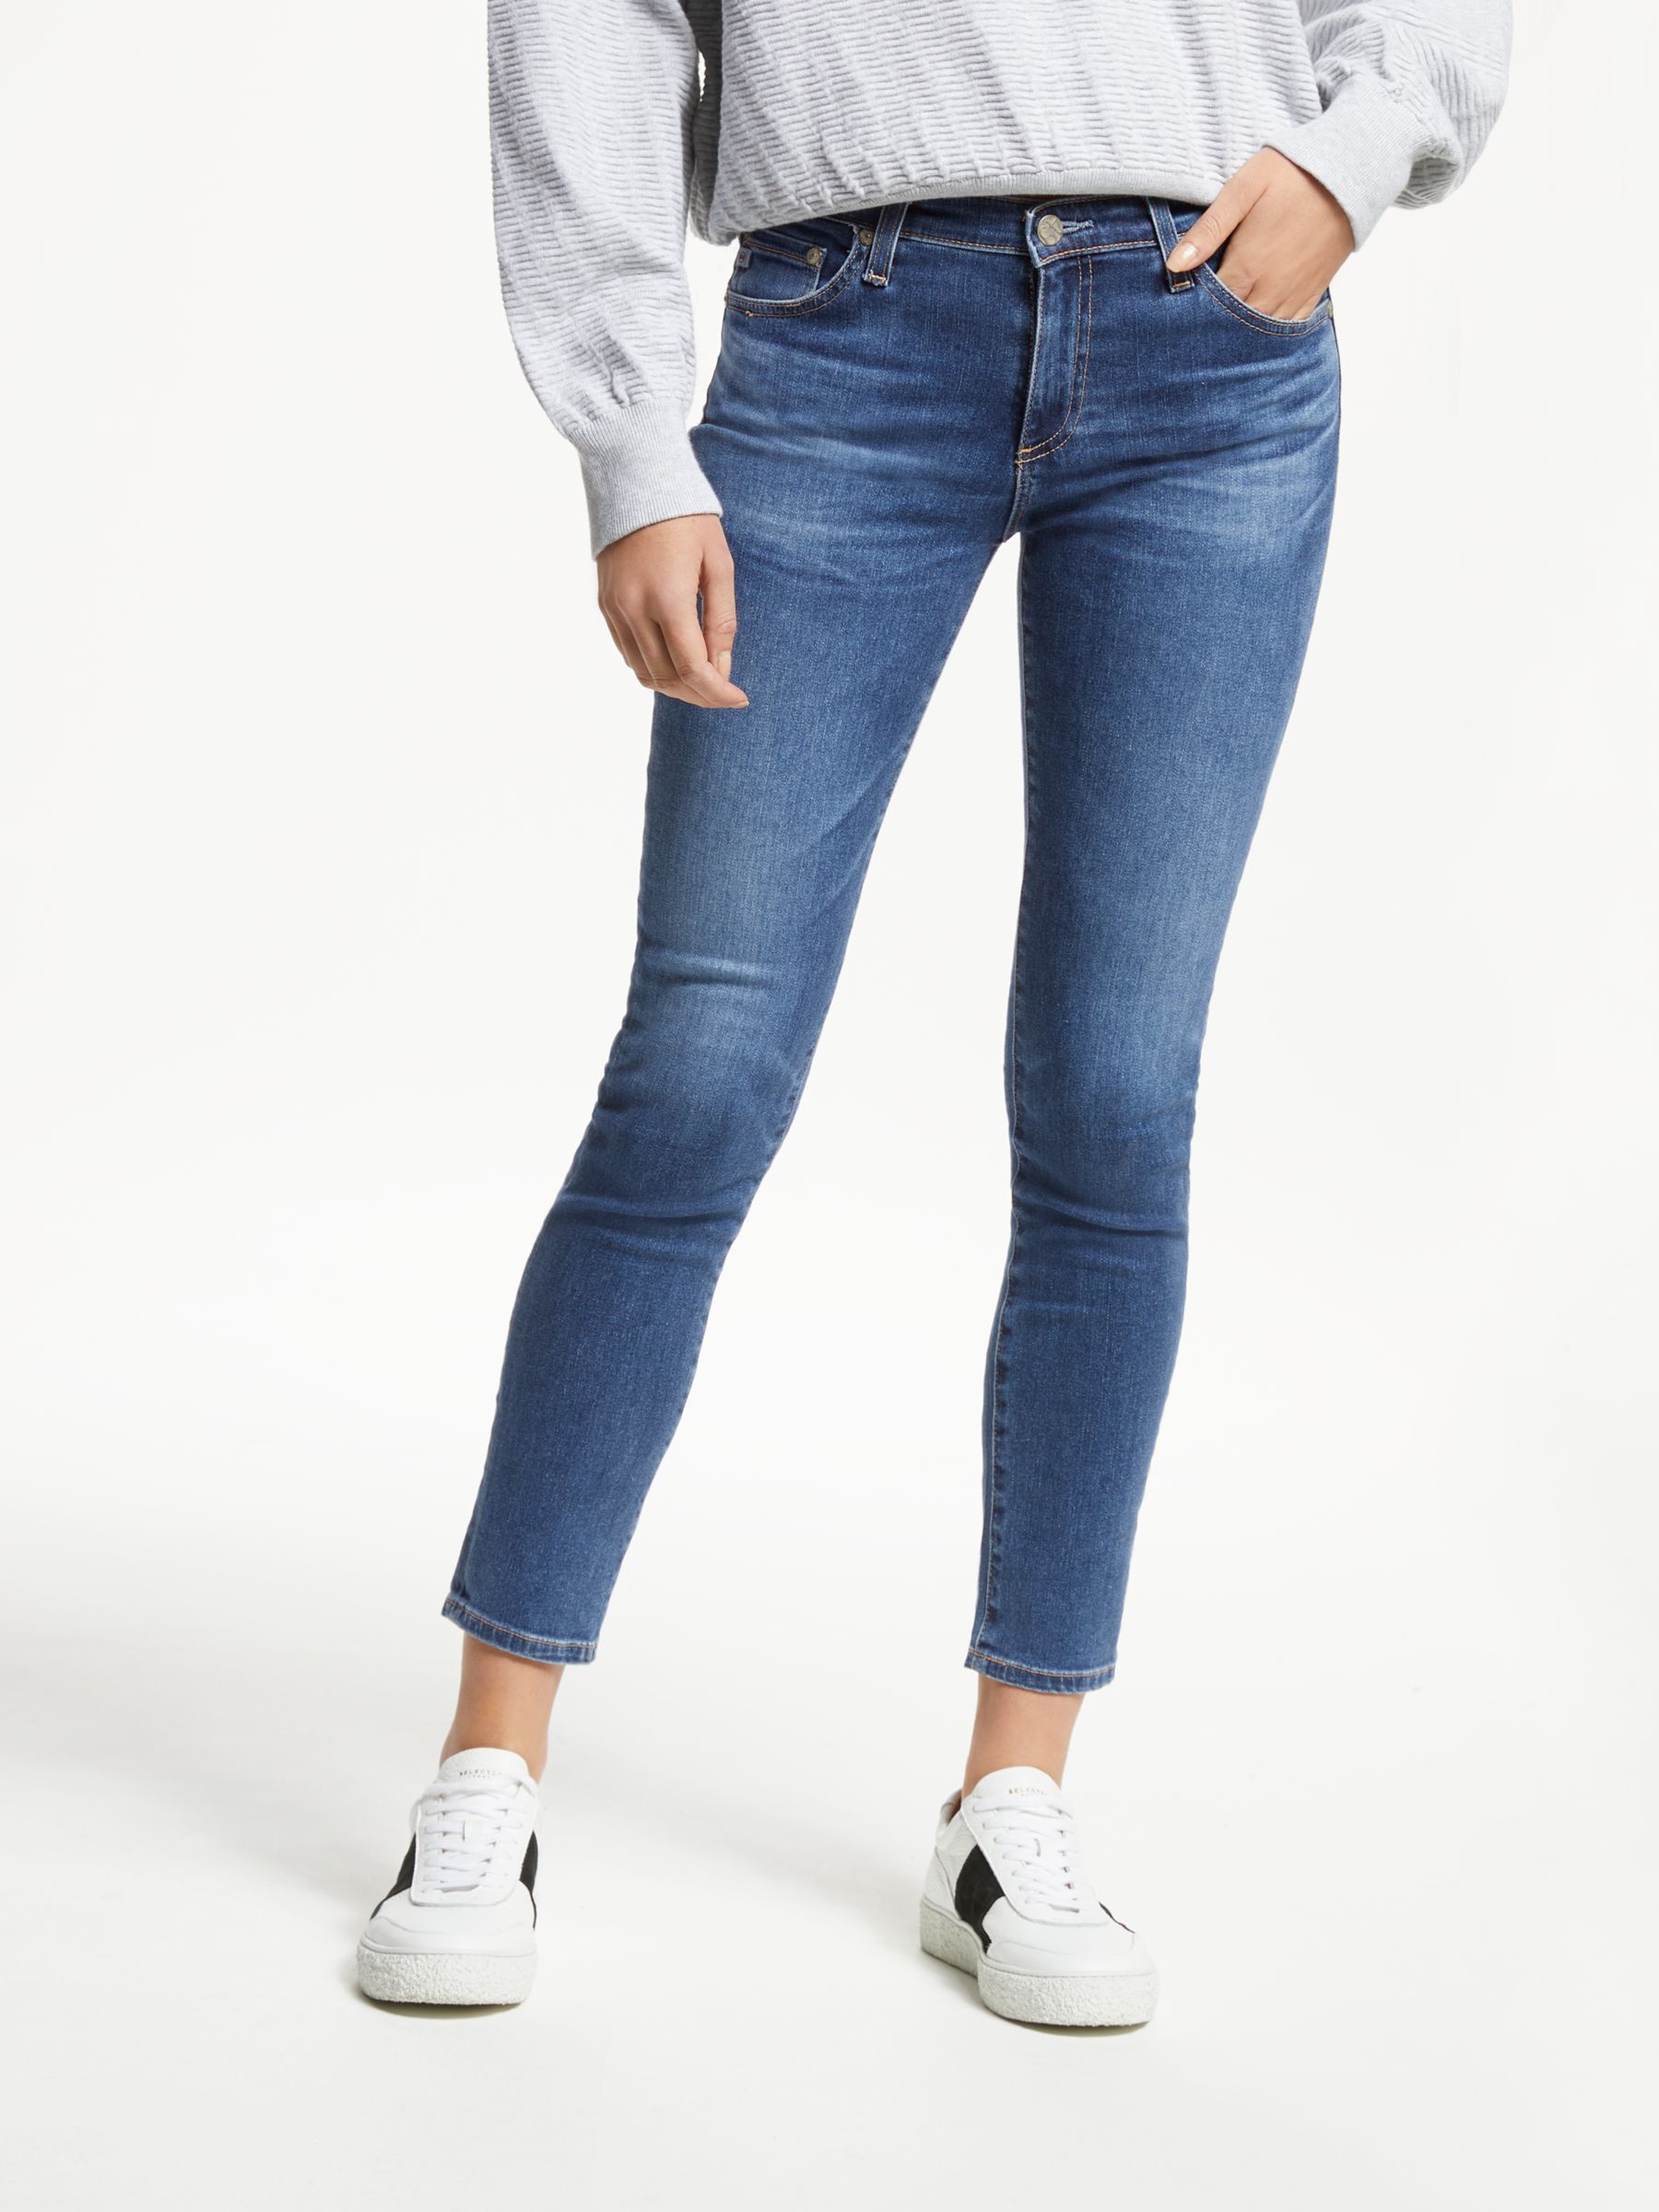 ag prima ankle jeans